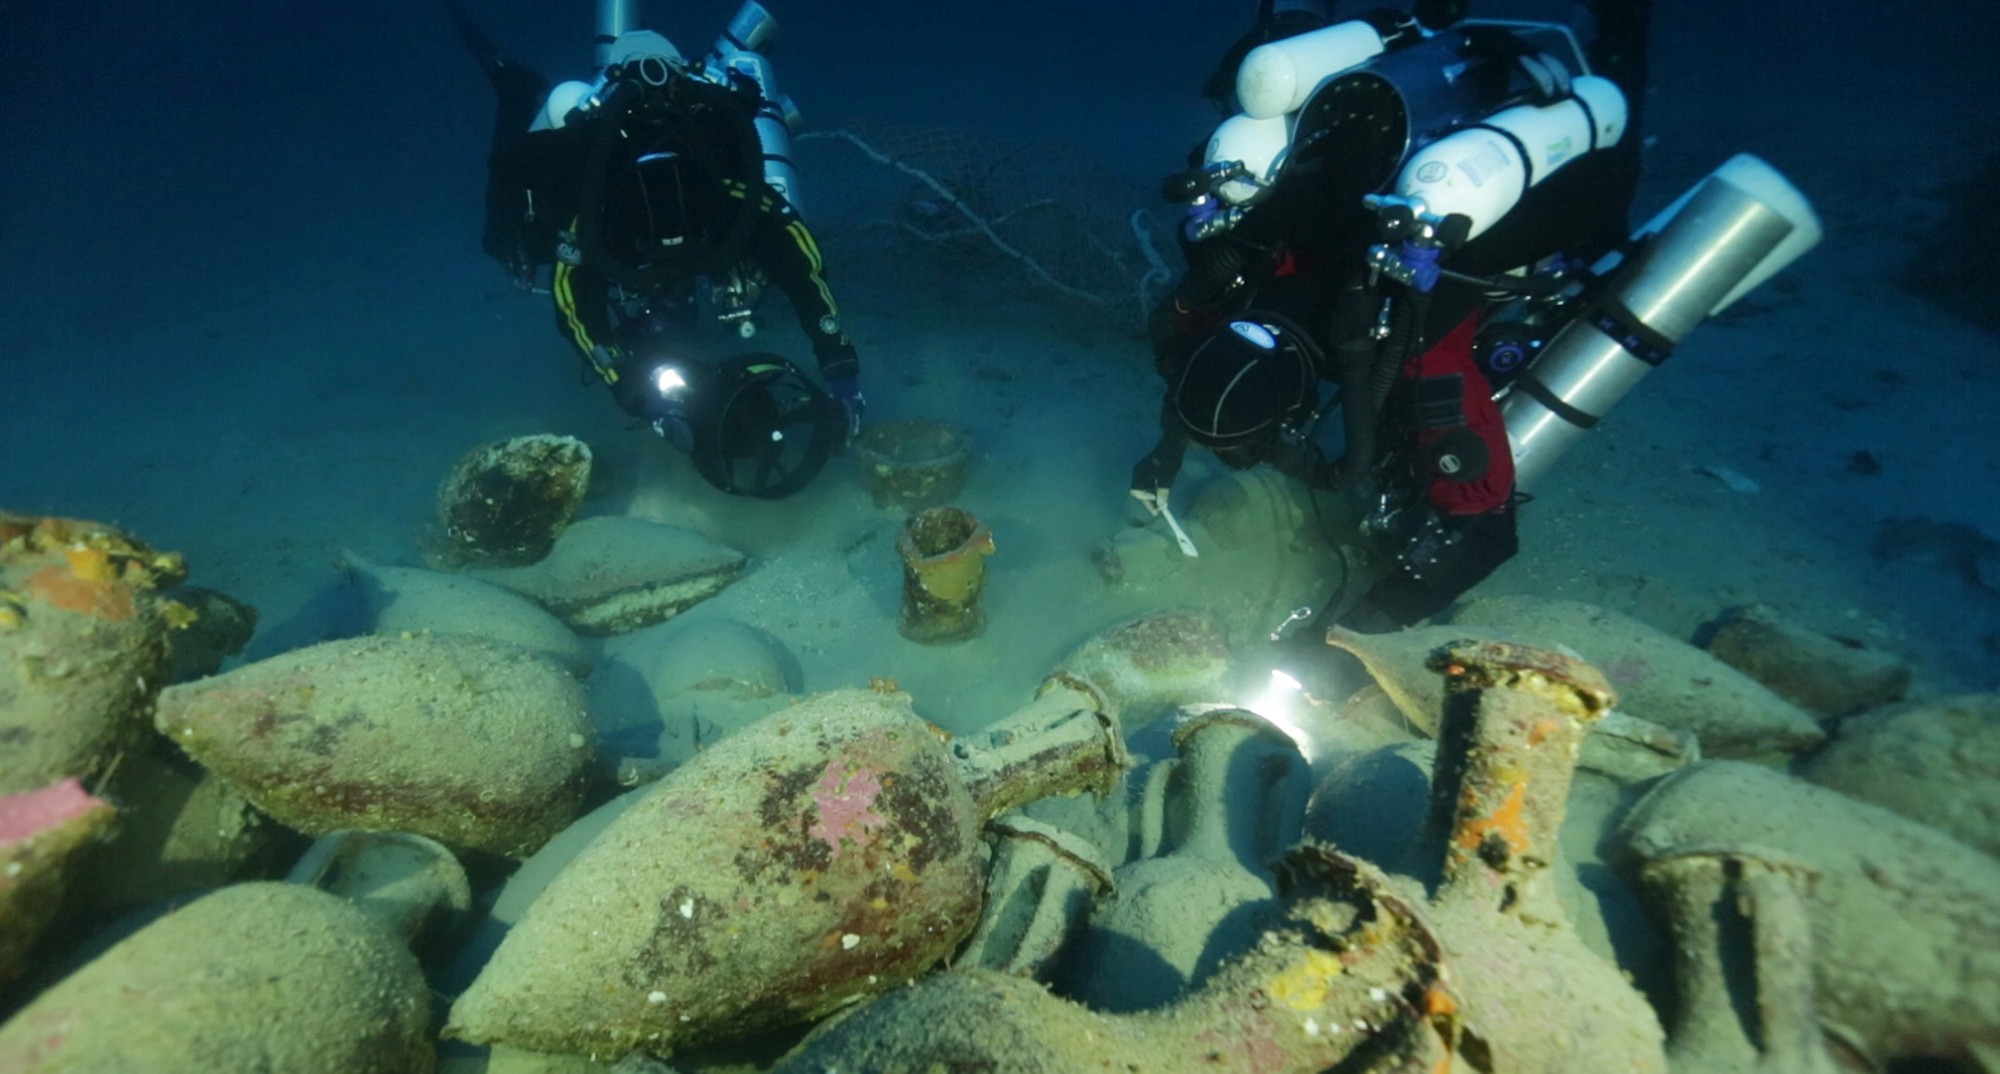 In this undated photograph provided by Global Underwater Explorers, divers illuminate Greco-Roman artifacts from a ship that sank during the Punic Wars between 218-201 B.C., in the Mediterranean Sea, off the Aeolian Island of Panarea.